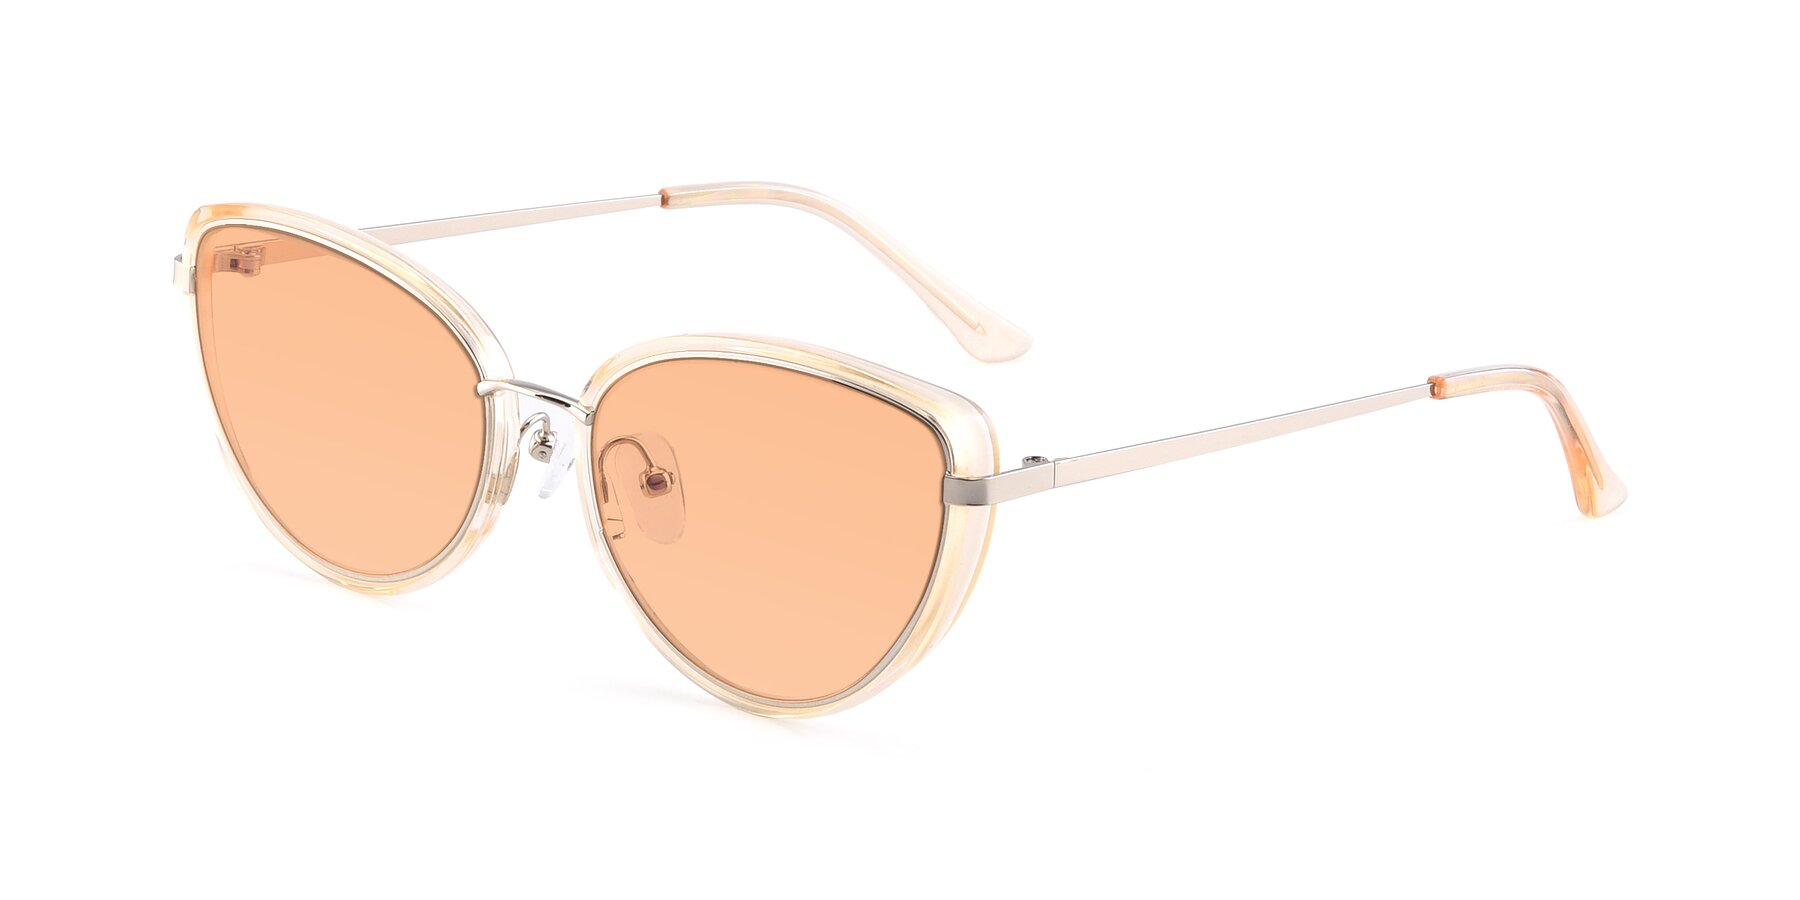 Angle of 17706 in Transparent Caramel-Silver with Light Orange Tinted Lenses